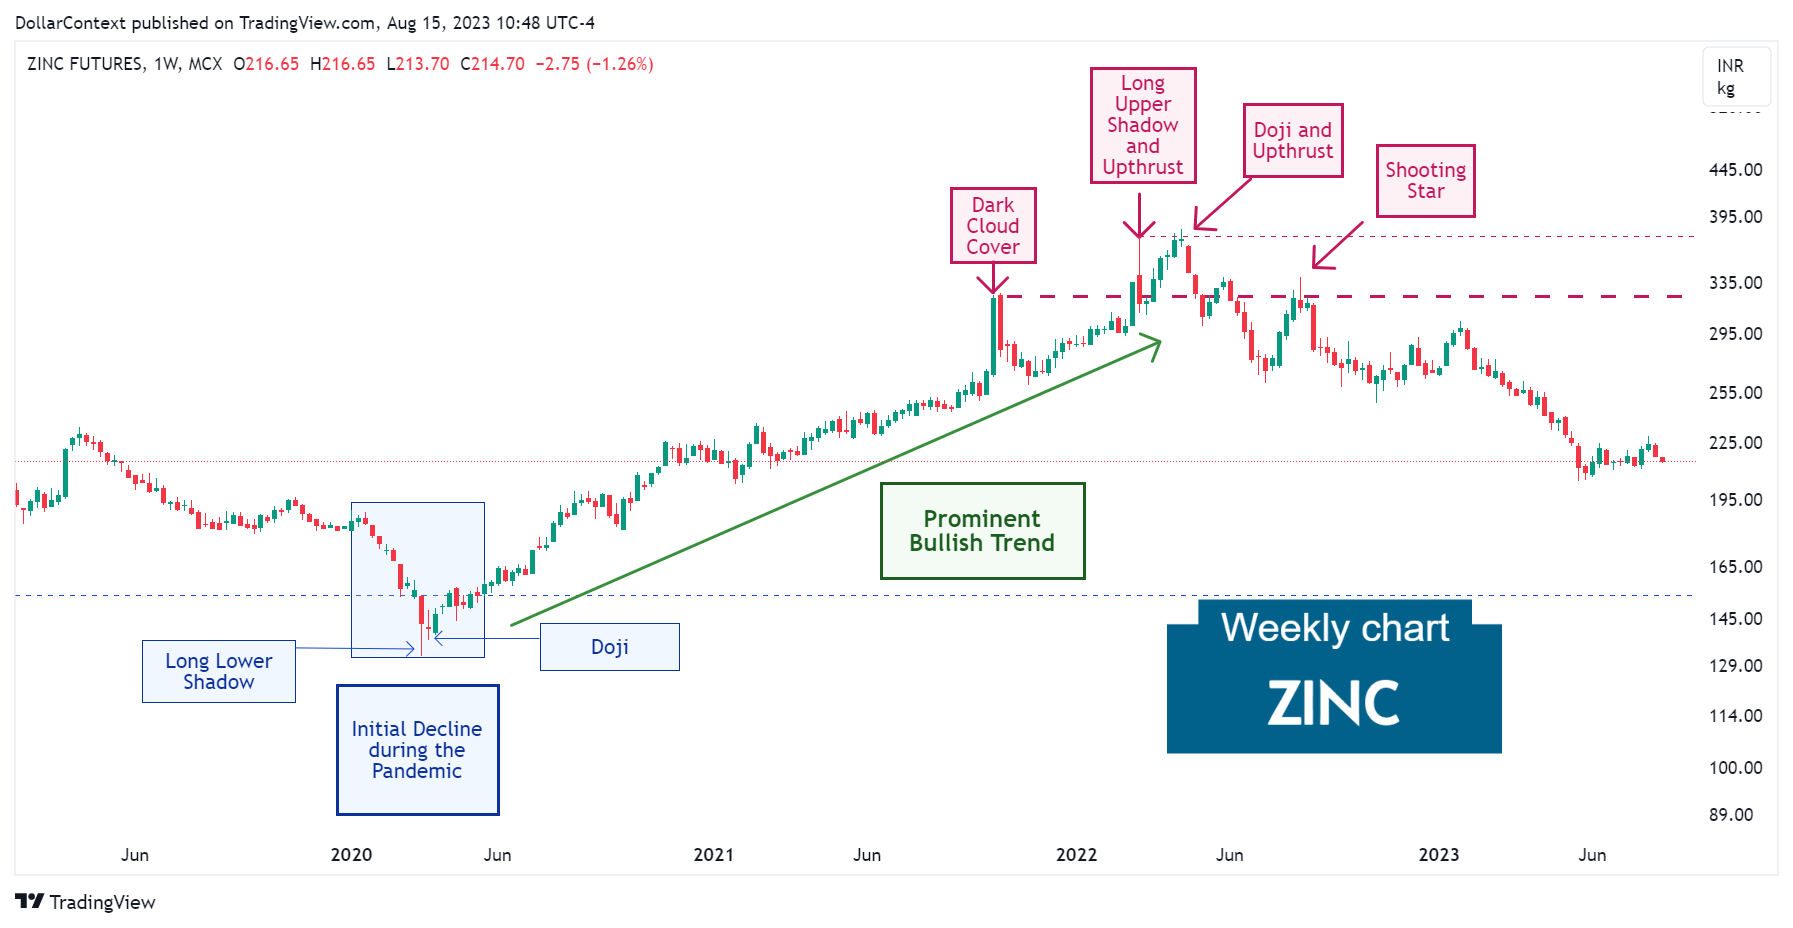 Zinc Futures: The Prominent Bullish Trend and the Subsequent Top